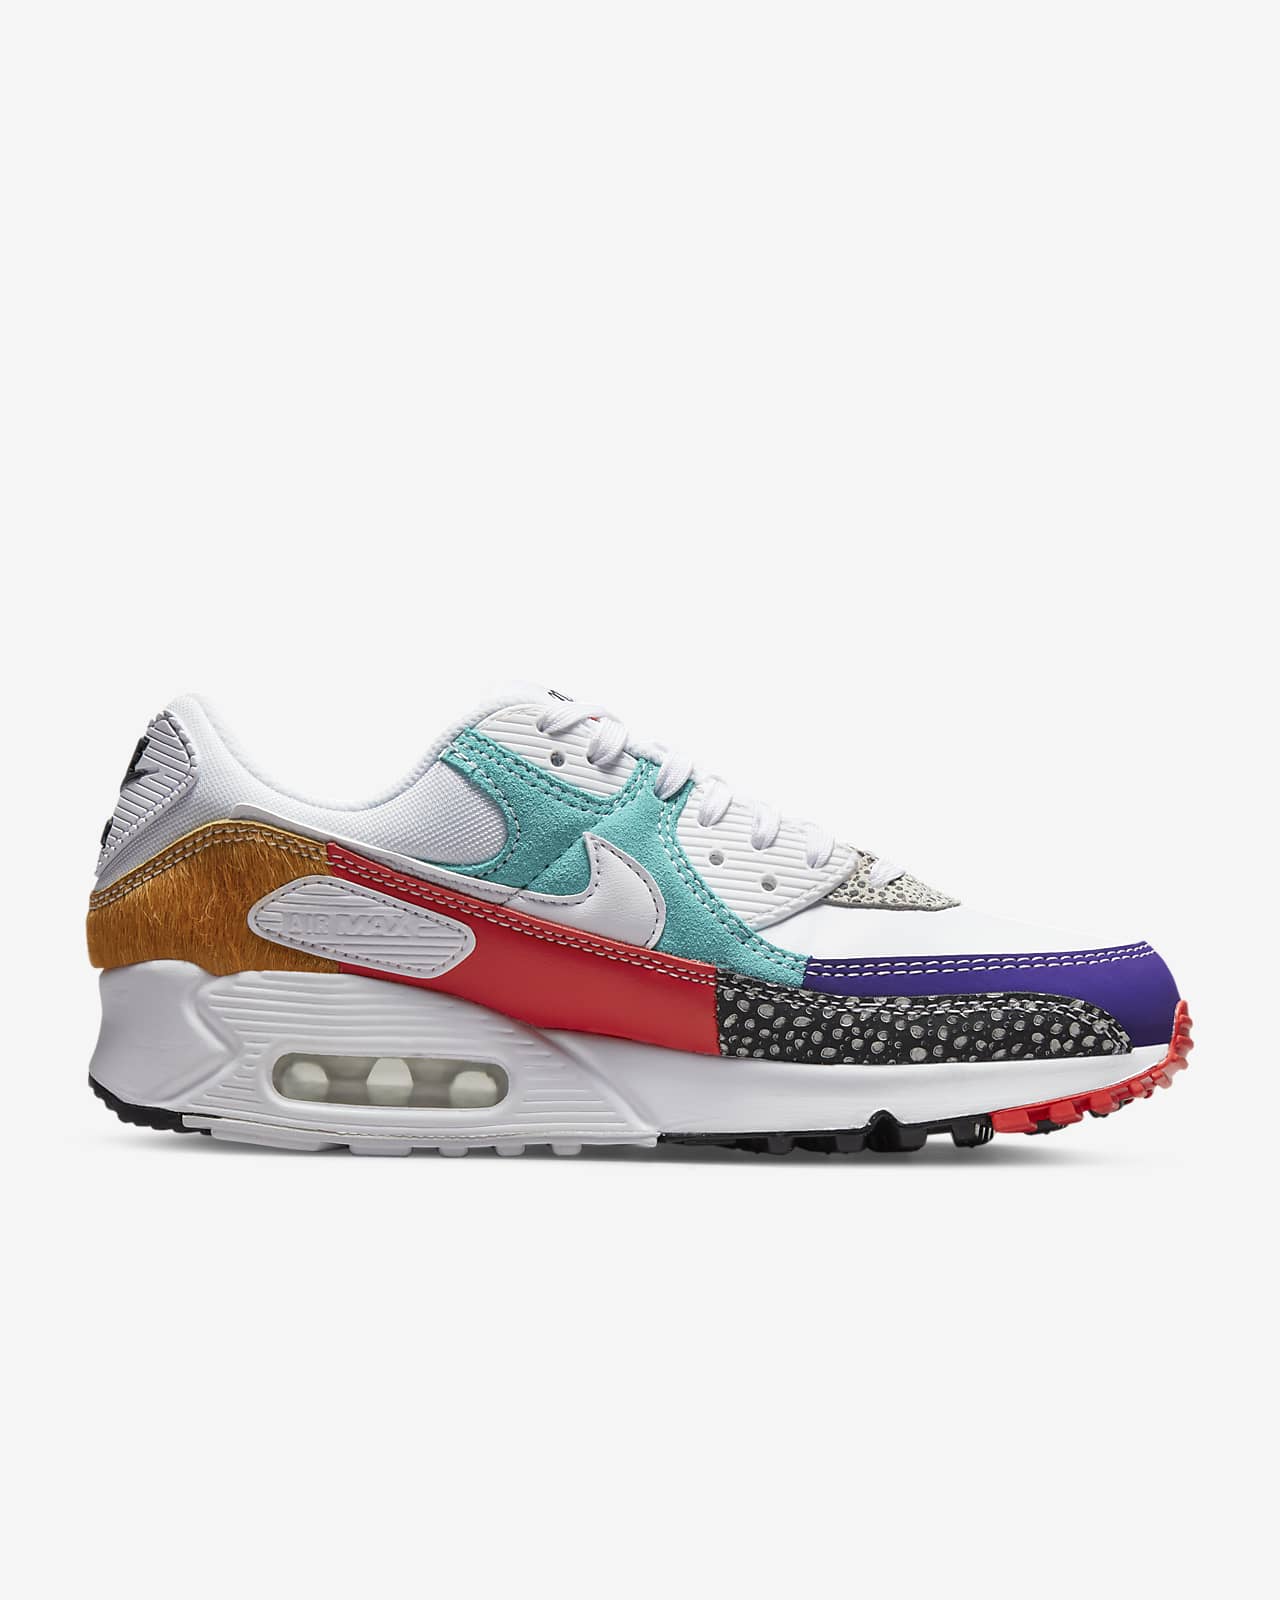 Consignment Do everything with my power shuttle Nike Air Max 90 SE Women's Shoes. Nike.com